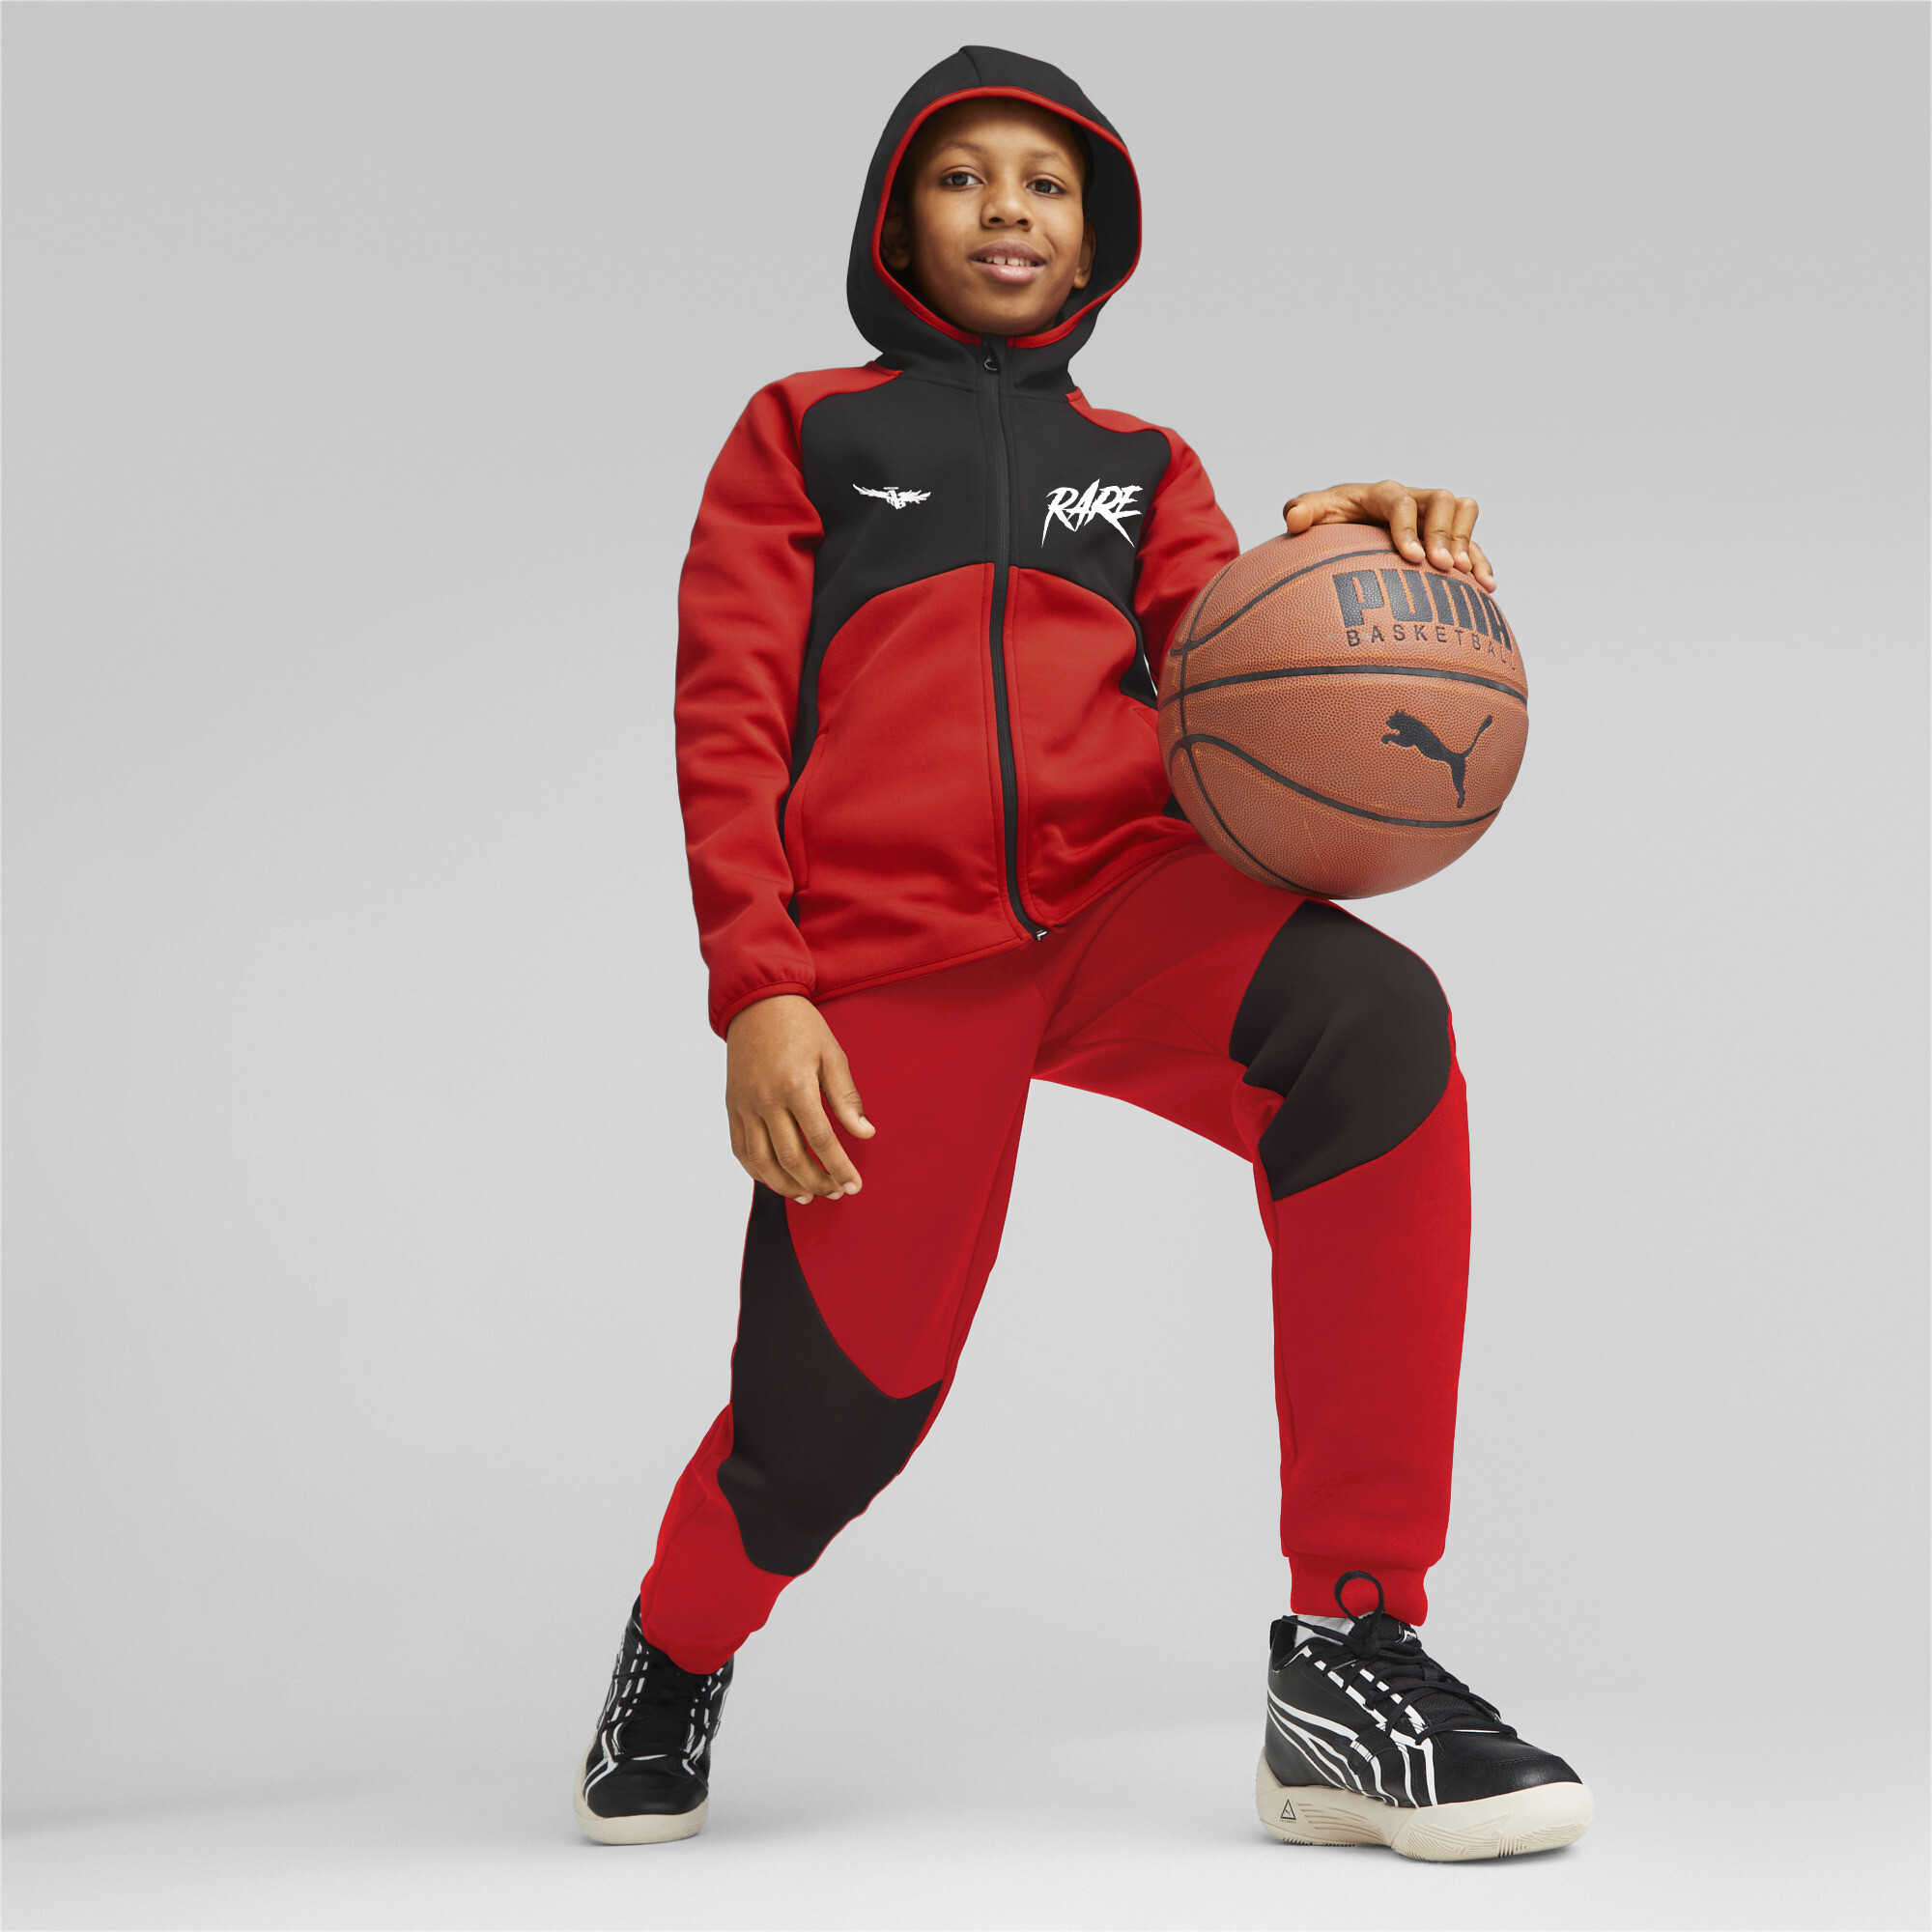 PUMA X MELO Dime Jacket In Red, Size 15-16 Youth